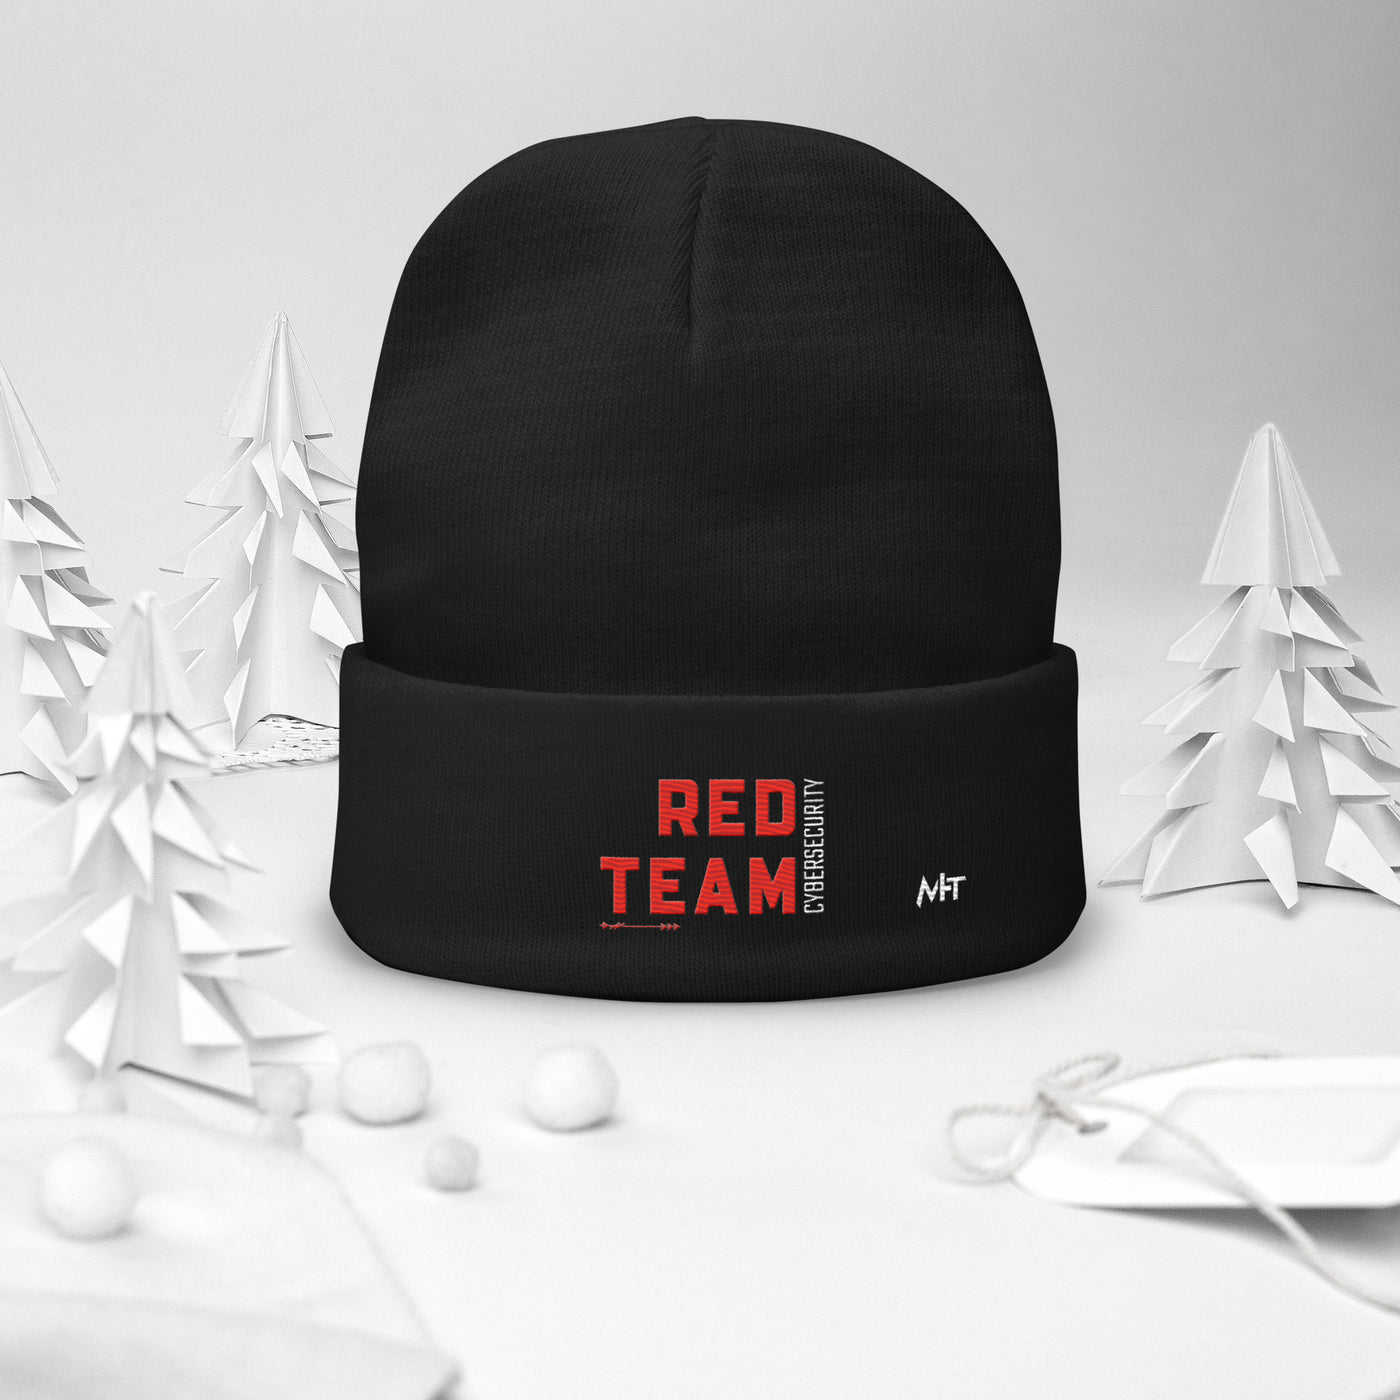 Cyber Security Red Team V7 - Embroidered Beanie